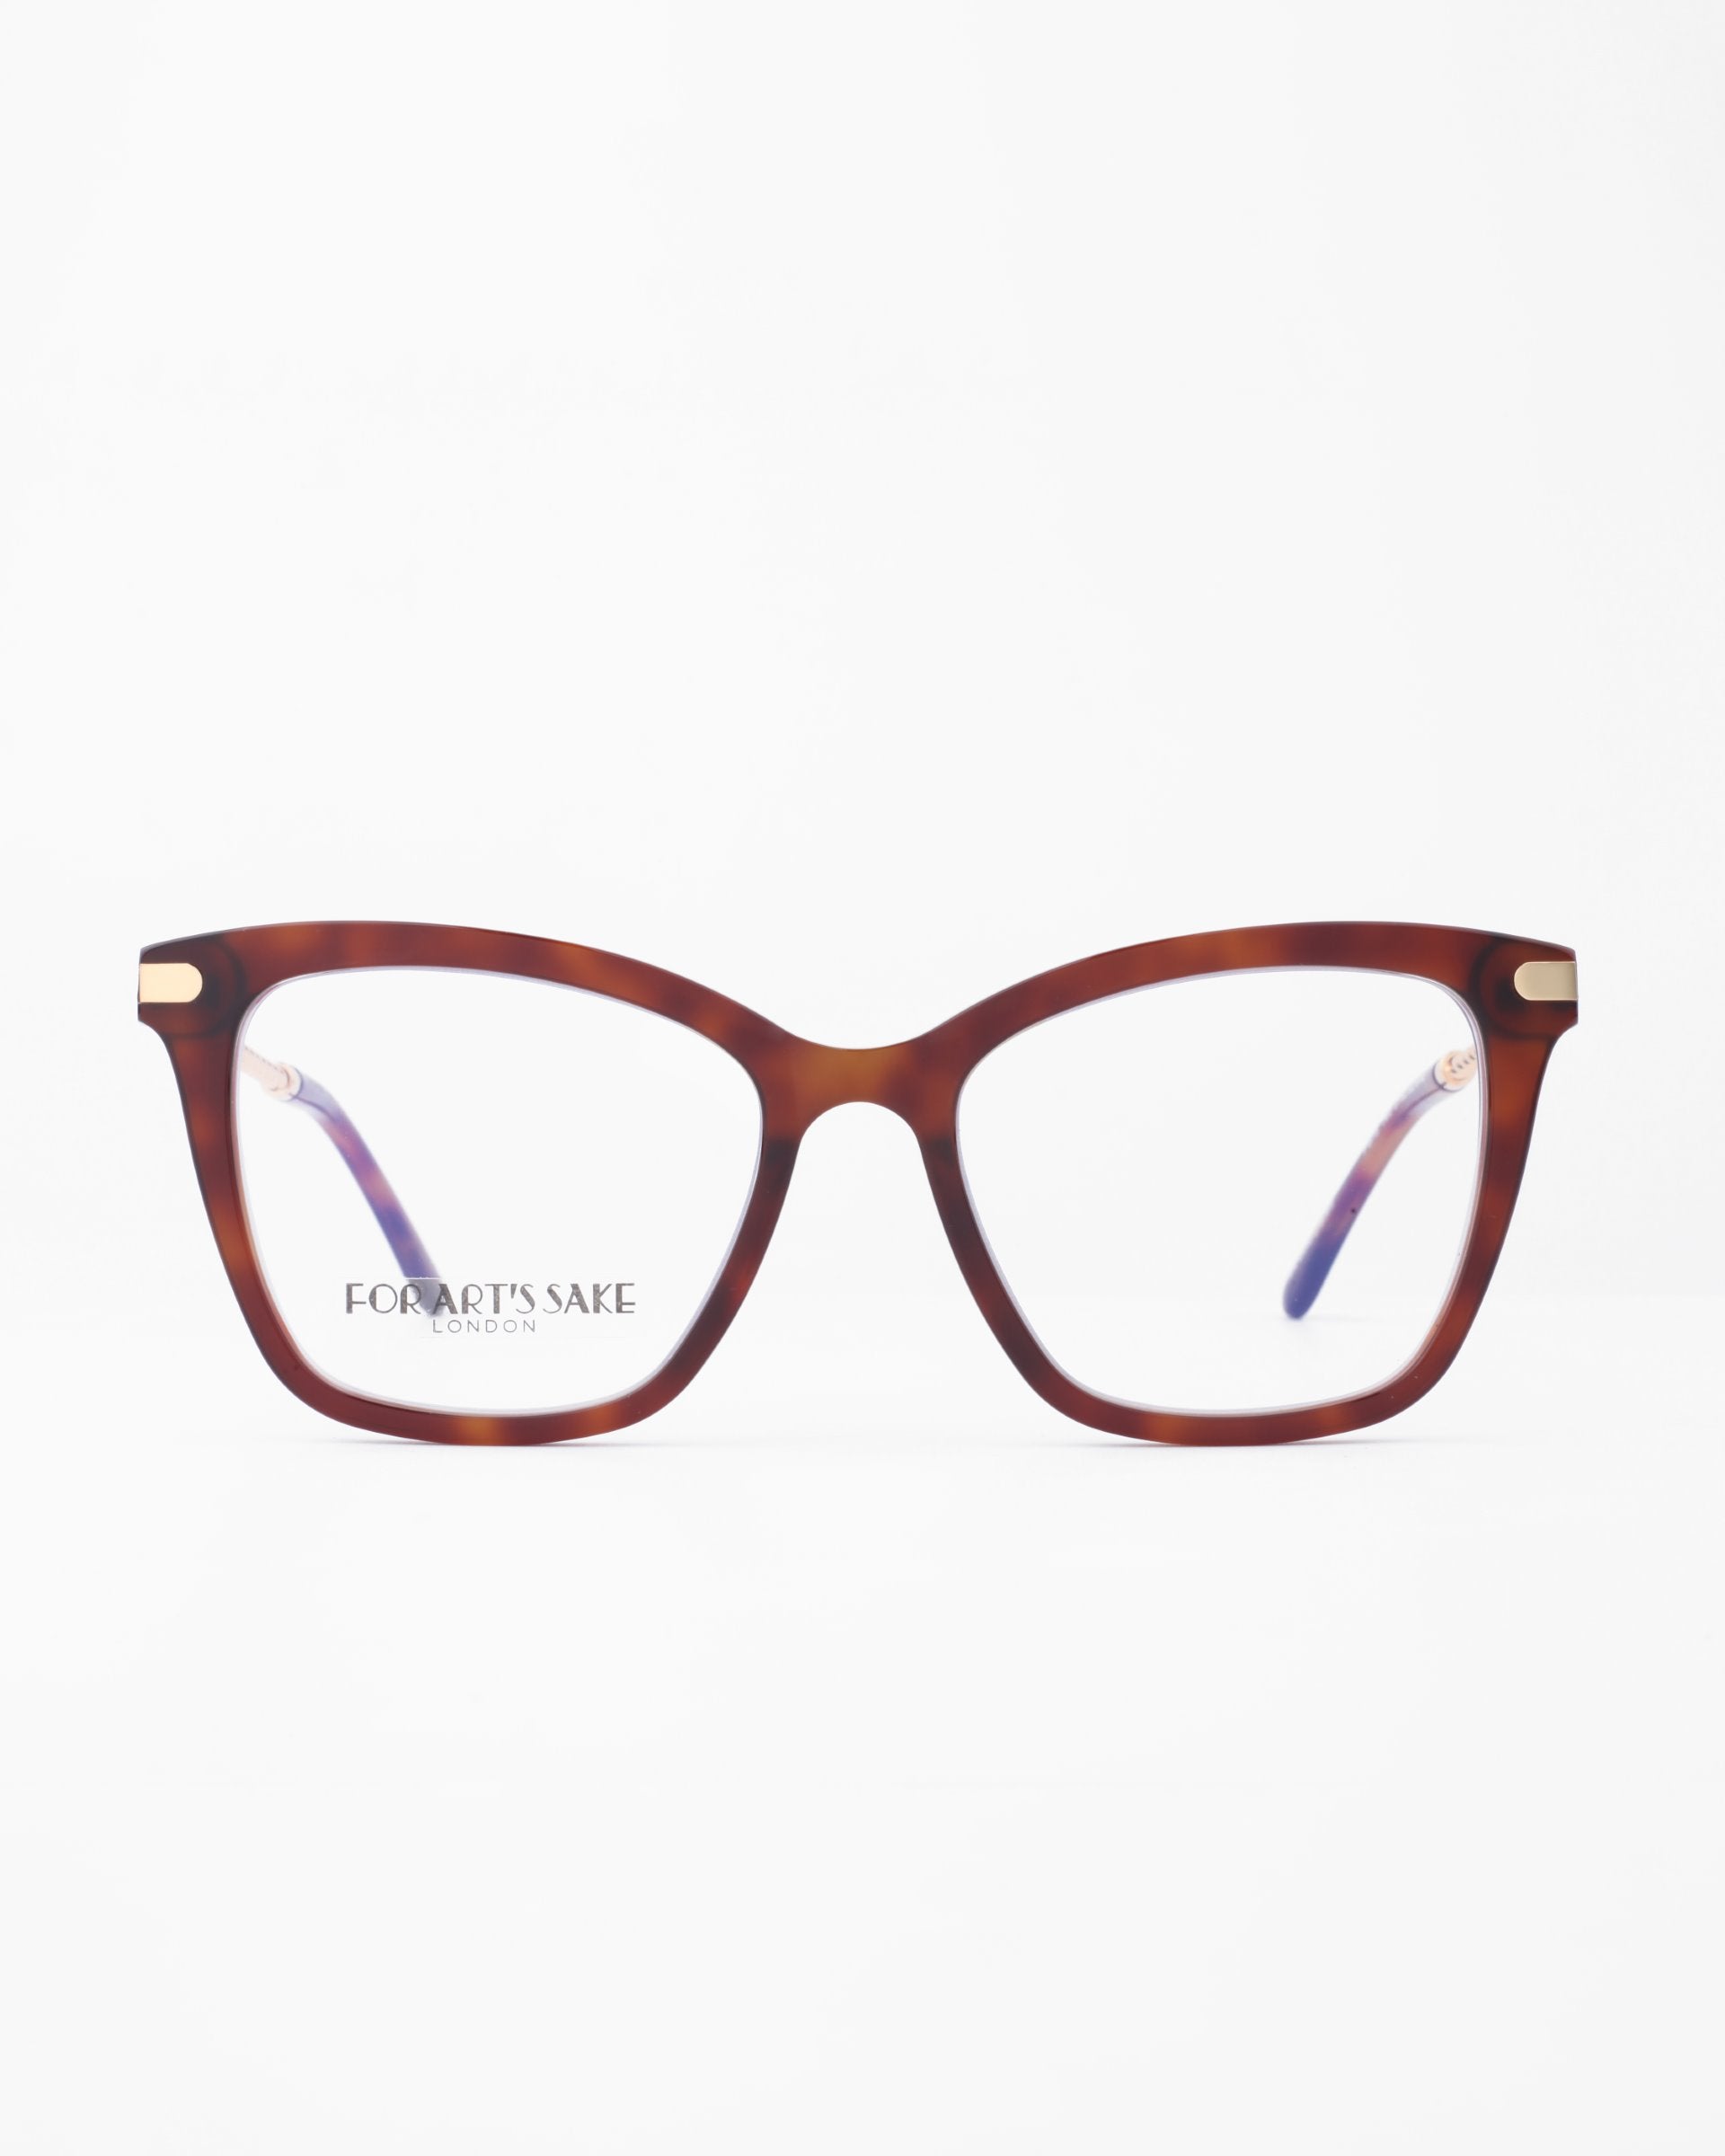 A pair of stylish, tortoiseshell pattern eyeglasses with a cat-eye shape. The frame features gold accents on the upper corners and the brand name &quot;For Art&#39;s Sake®&quot; is visible on one of the clear lenses. These chic Paris Two glasses also include a Blue Light Filter for added eye comfort. The background is white.